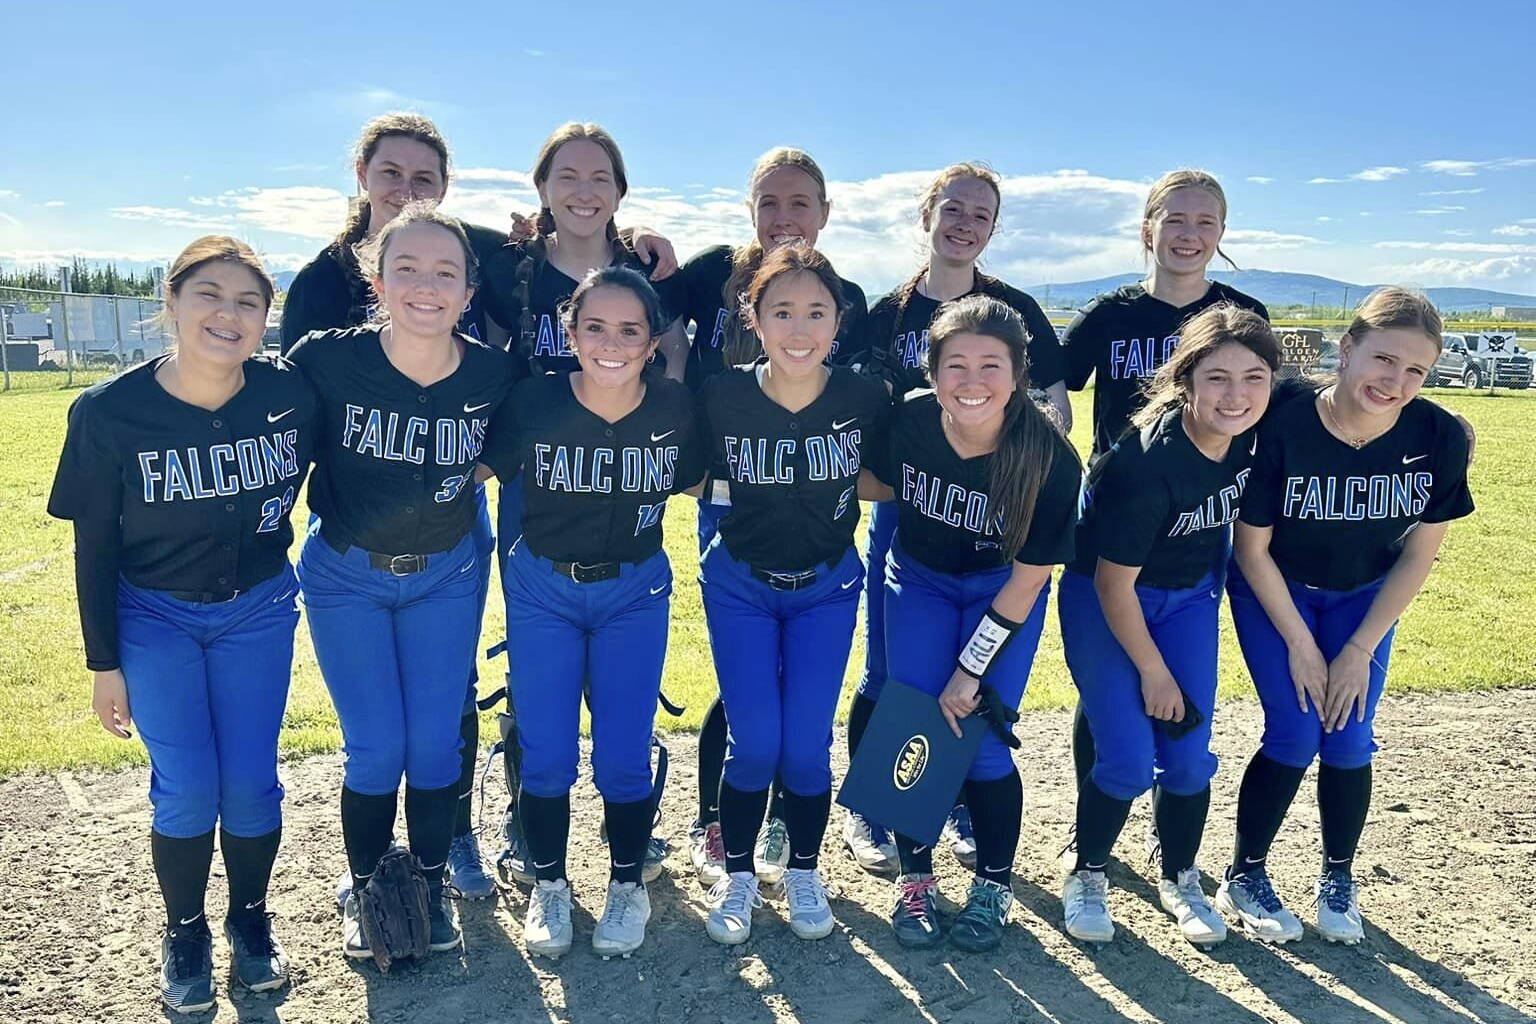 Members of the Thunder Mountain High School softball team pose for a shot following their 18-0 victory against North Pole High School on Friday during the Division II Alaska School Activities Association Softball State Championships in Fairbanks. (Thunder Mountain Softball photo)